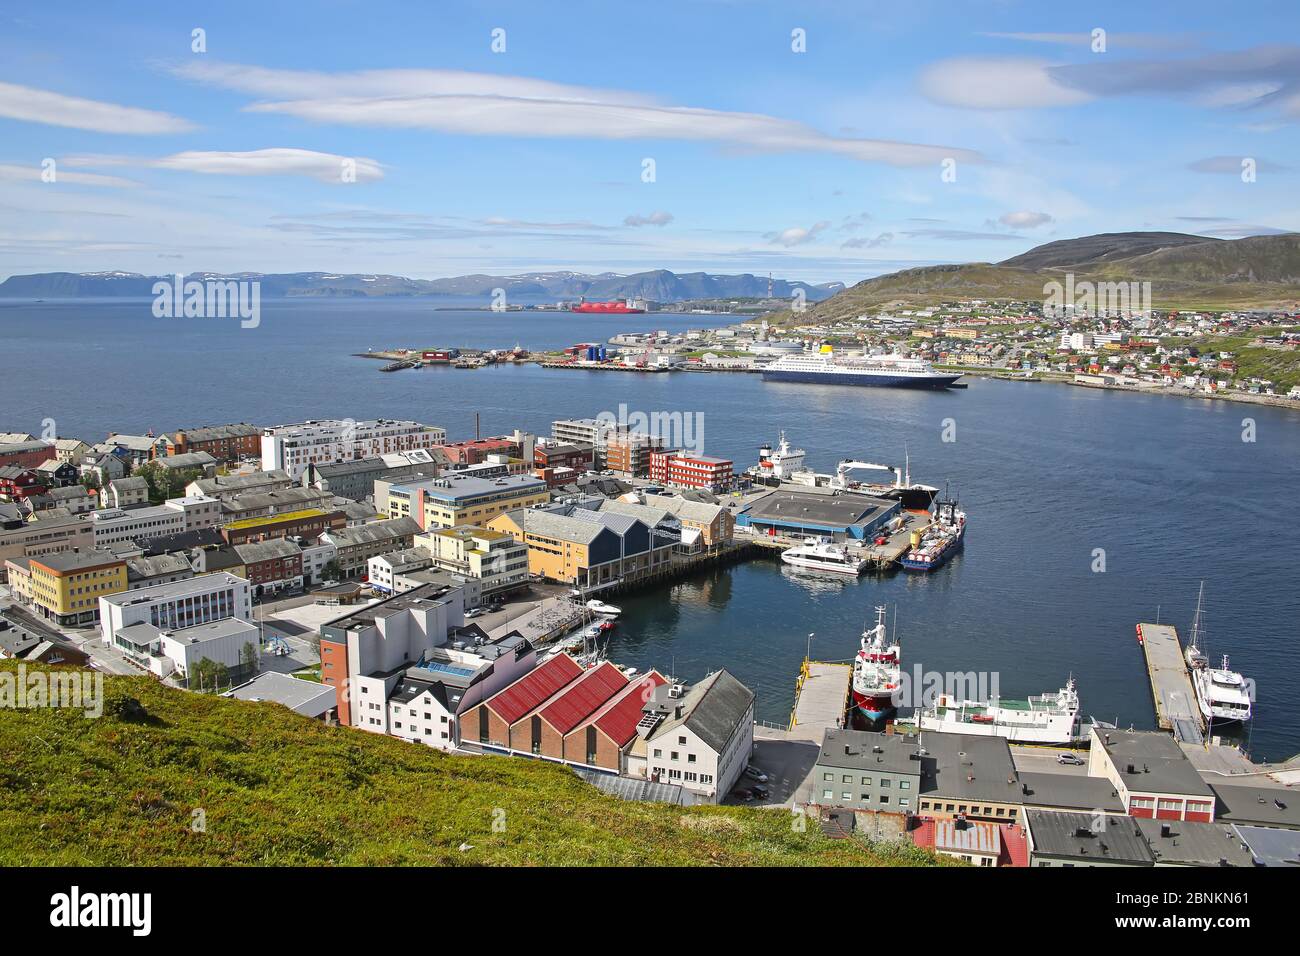 Town of Hammerfest with the downtown area, port, cruise ships & mountains in the background. Hammerfest is the northernmost town in the world with mor Stock Photo